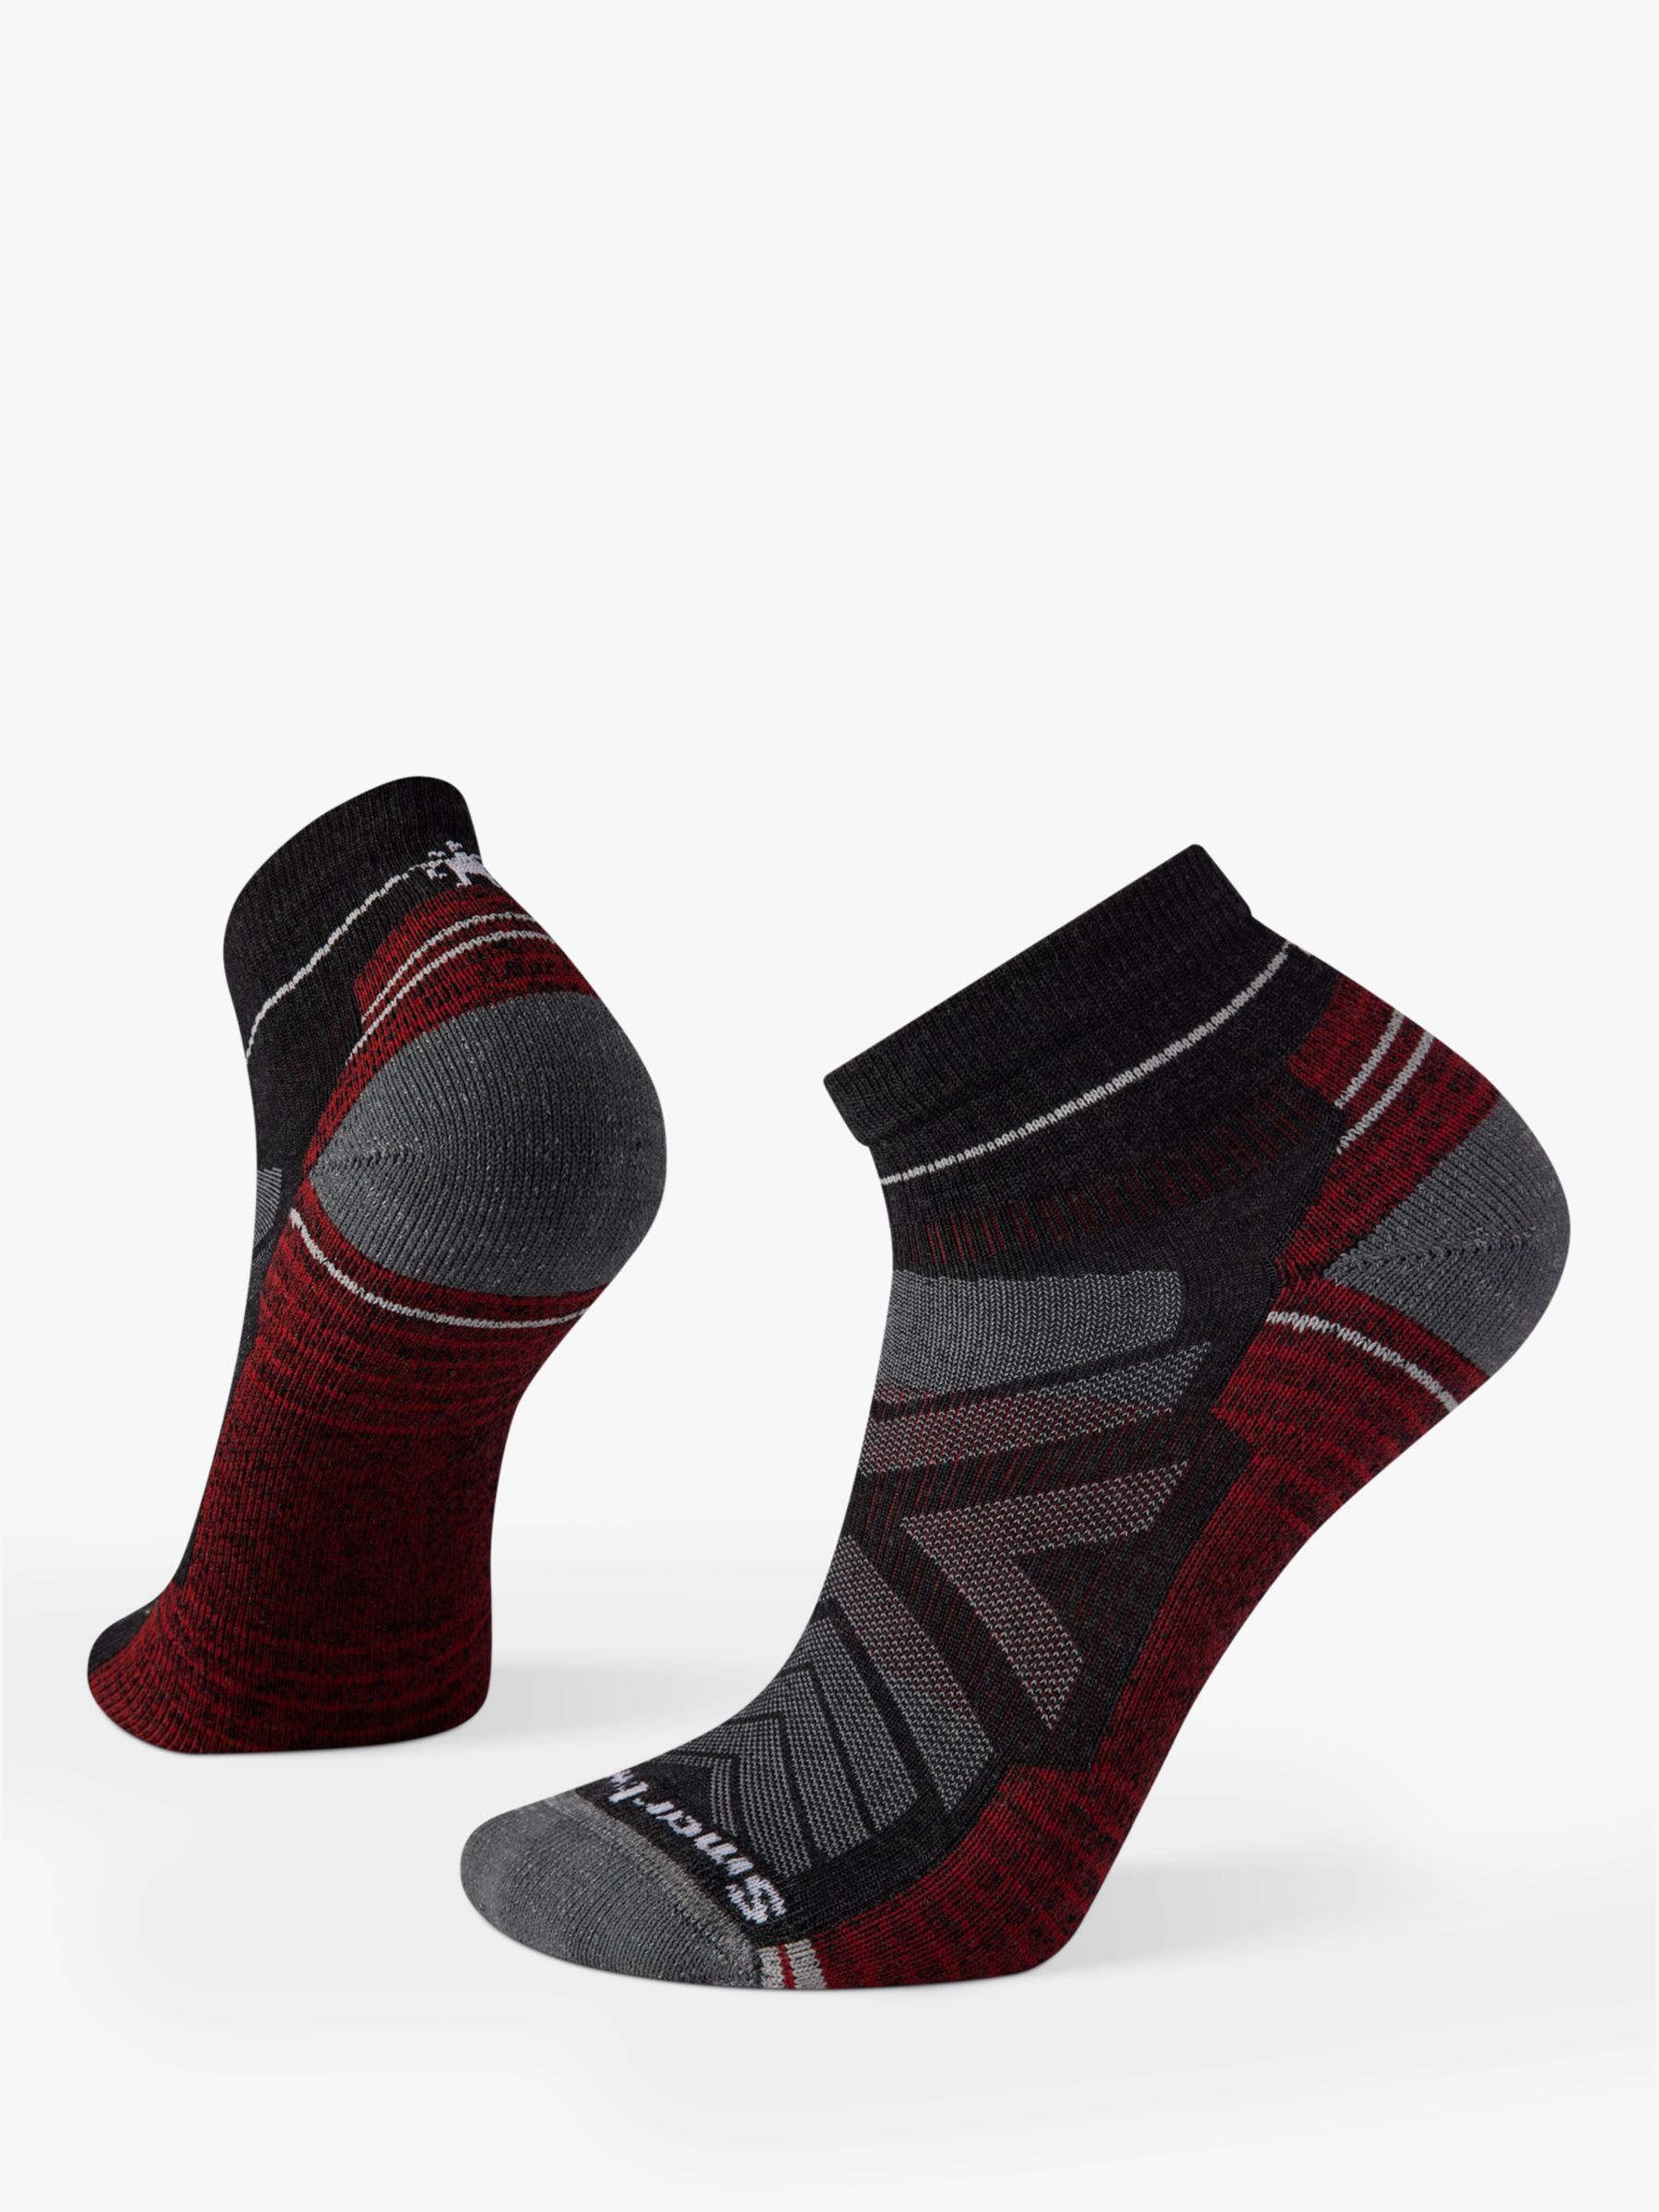 Extra Wide Cotton Ankle Socks by Norfolk - Lima  70% more stretch than  standard sock ideal if you have Swollen Legs or Feet